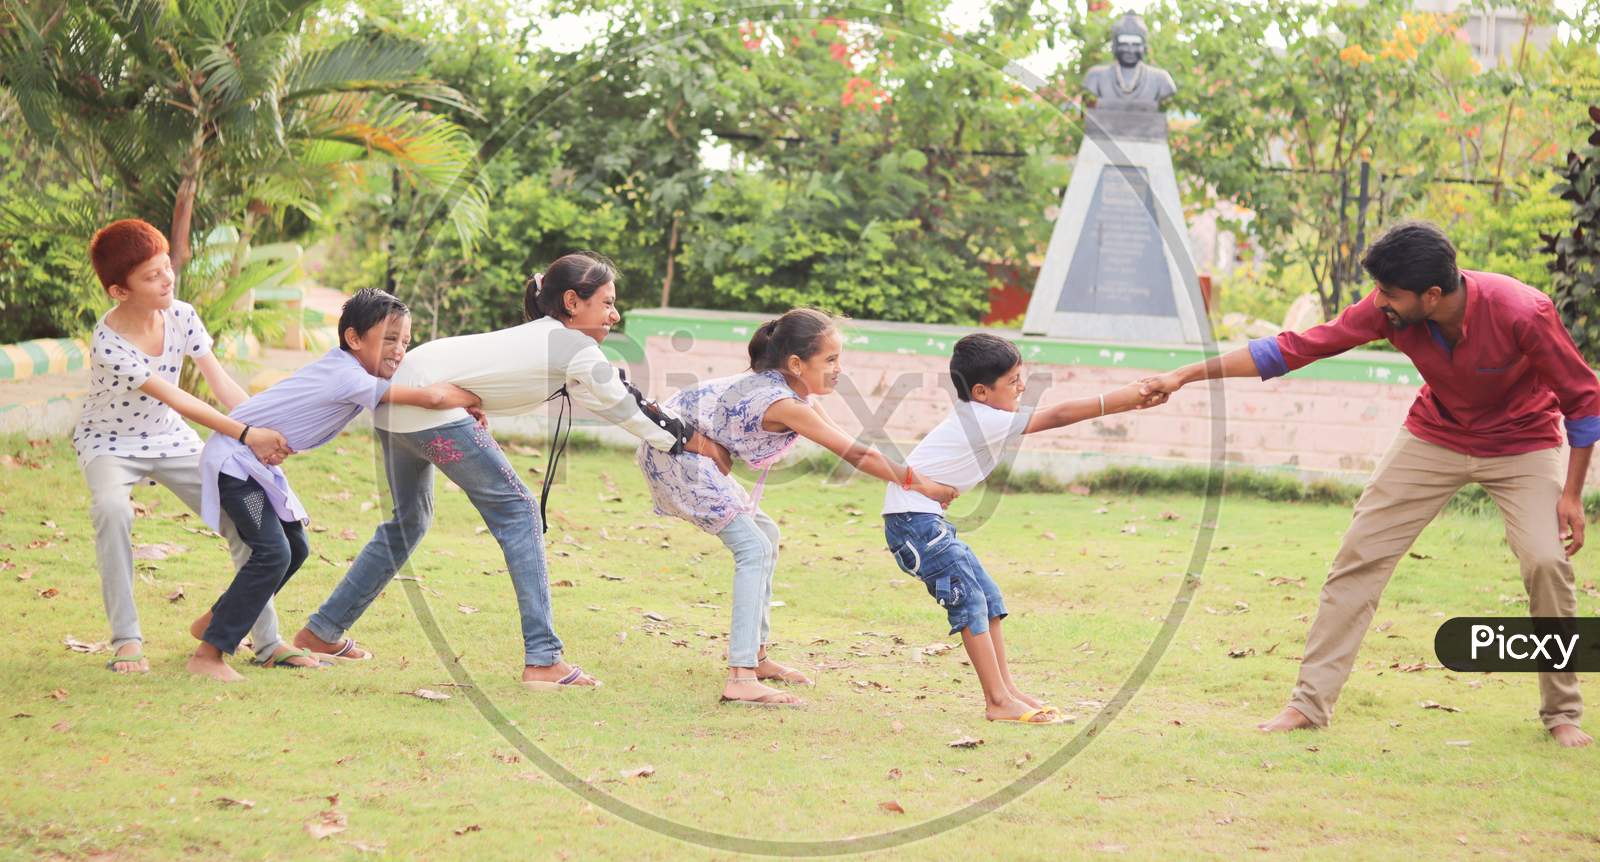 Children's Playing Traditional Games At a Park, Outdoors - Concept Of Kids Enjoying Outdoor Games In Technology-Driven World.